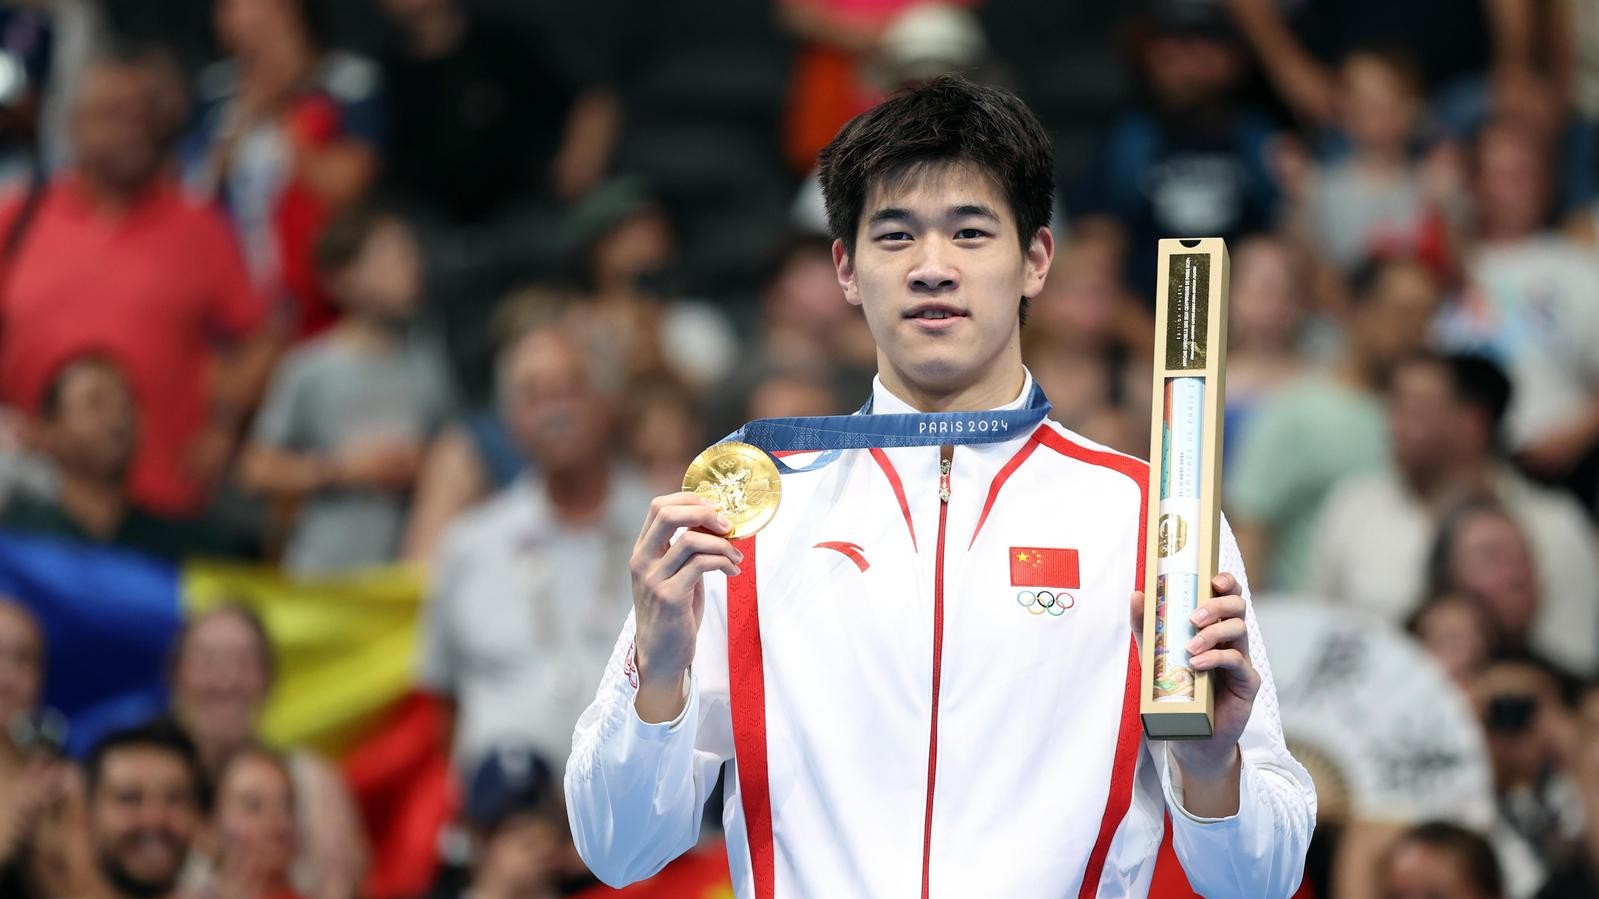 First in a century: How China's swimming superman Pan Zhanle set world records?